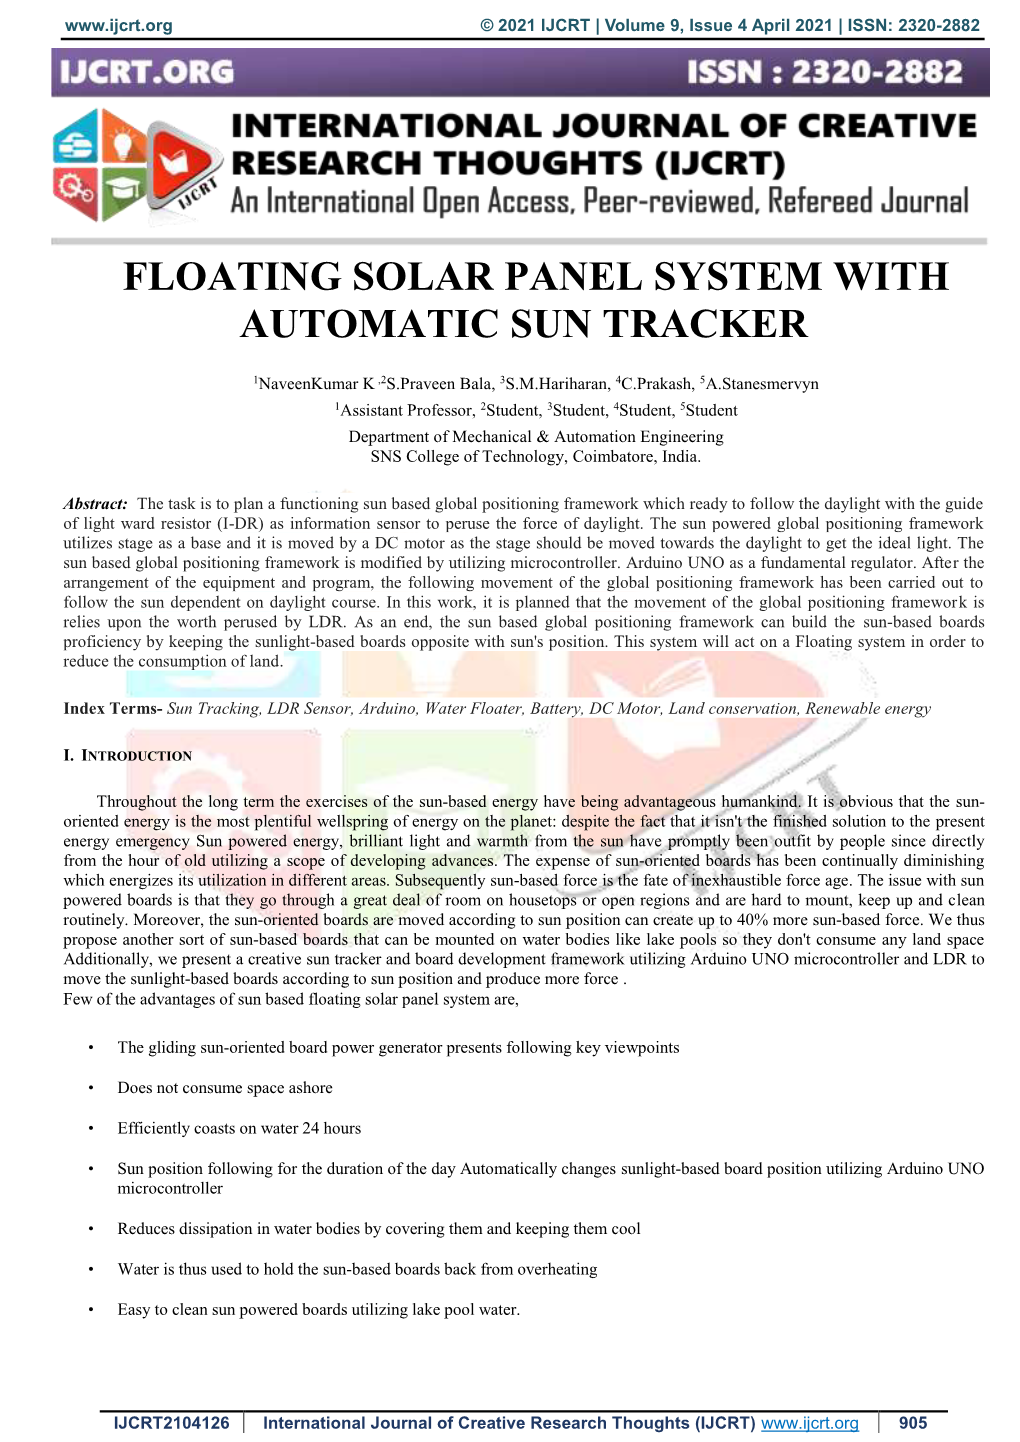 Floating Solar Panel System with Automatic Sun Tracker